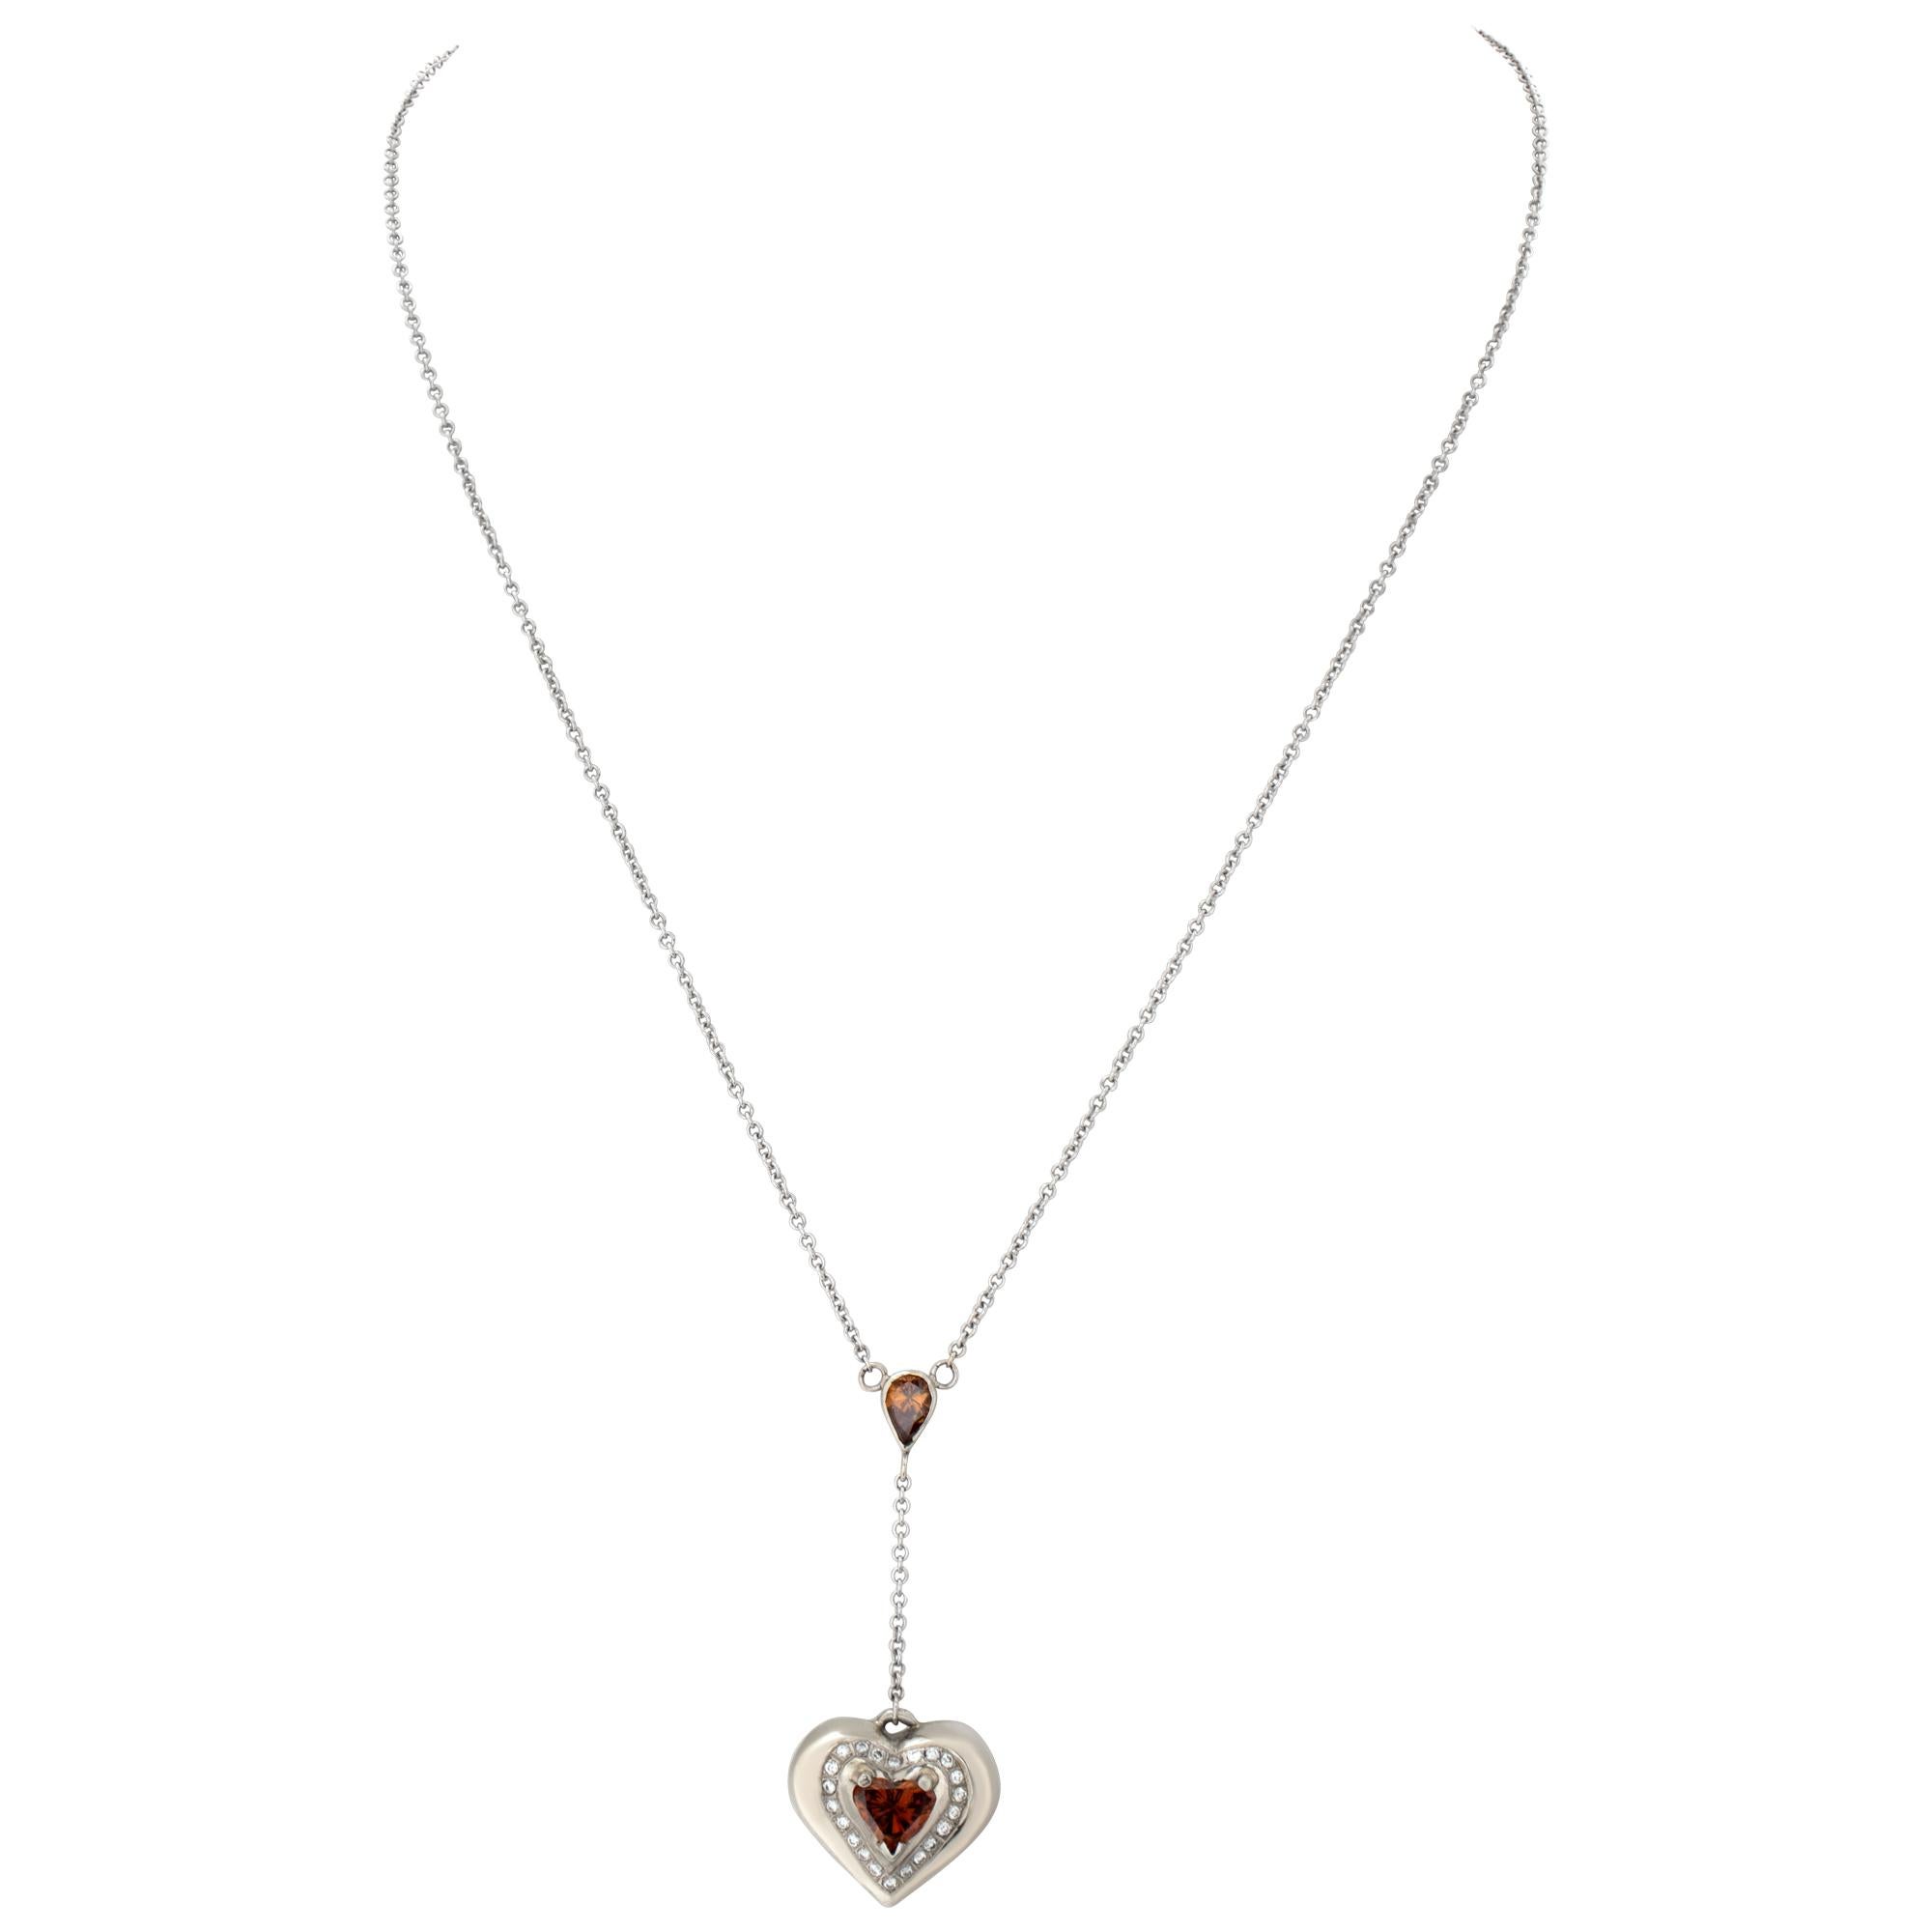 One of a kind heart pendant necklace in 18k white gold, with approximately 0.80 carat heart shape white diamond on one side and 1.20 carat heart shape dark orange diamond on another side, with one bezel set pear shaped cut 0.39 carat diamond and